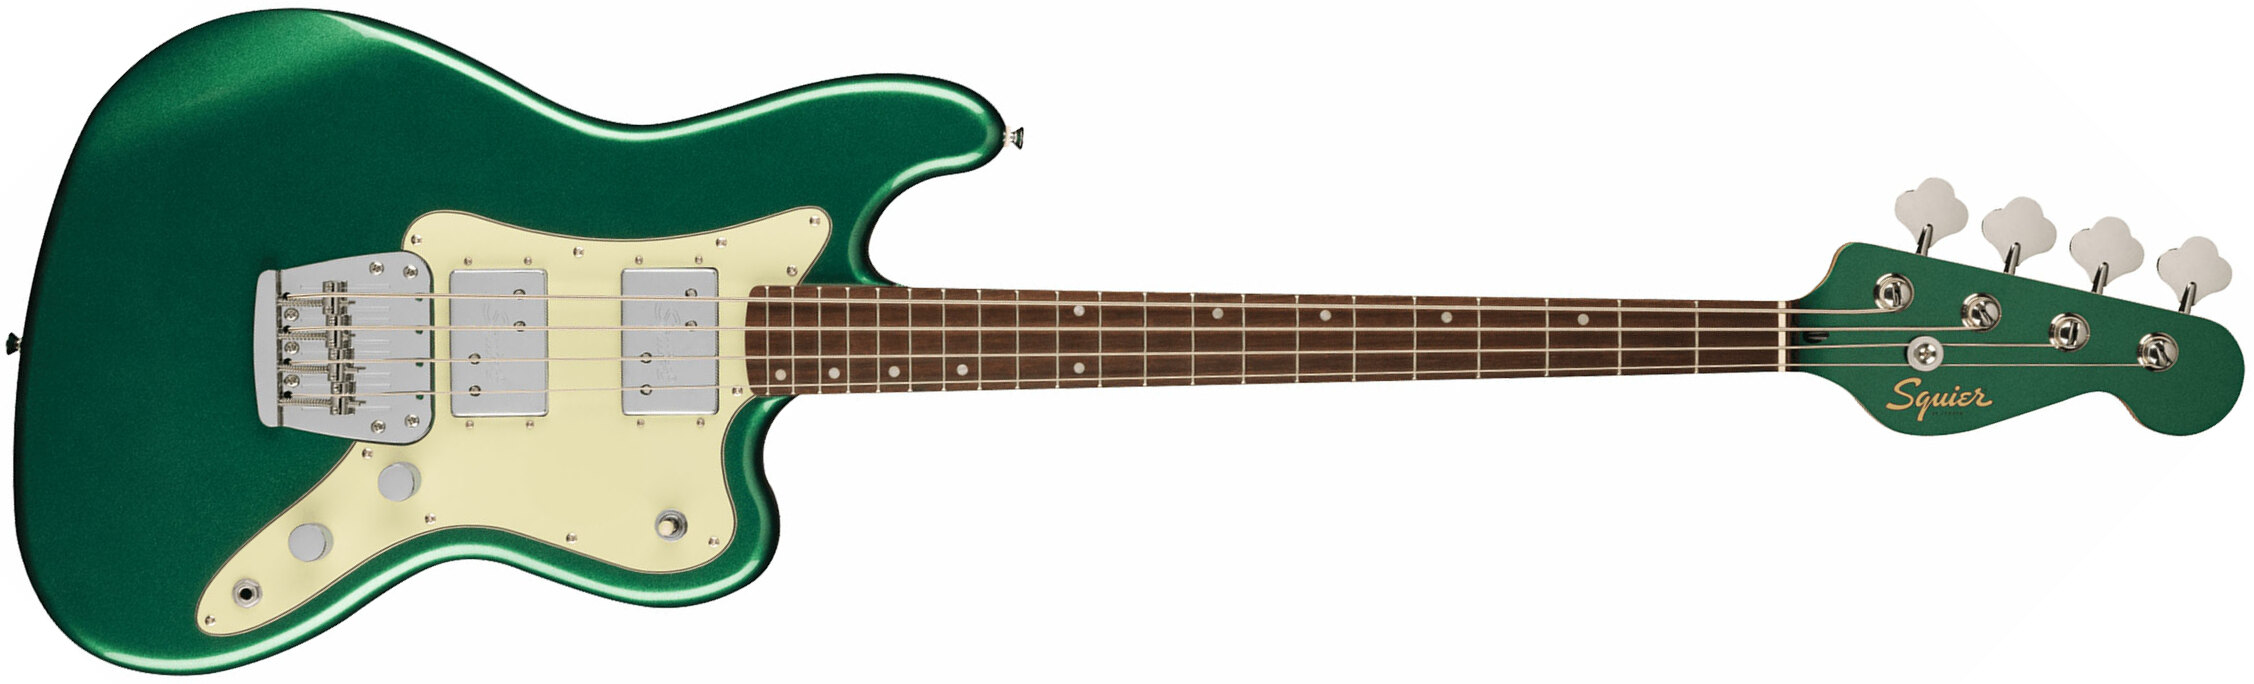 Squier Rascal Bass Hh Paranormal 2h Lau - Sherwood Green - Solidbody E-bass - Main picture